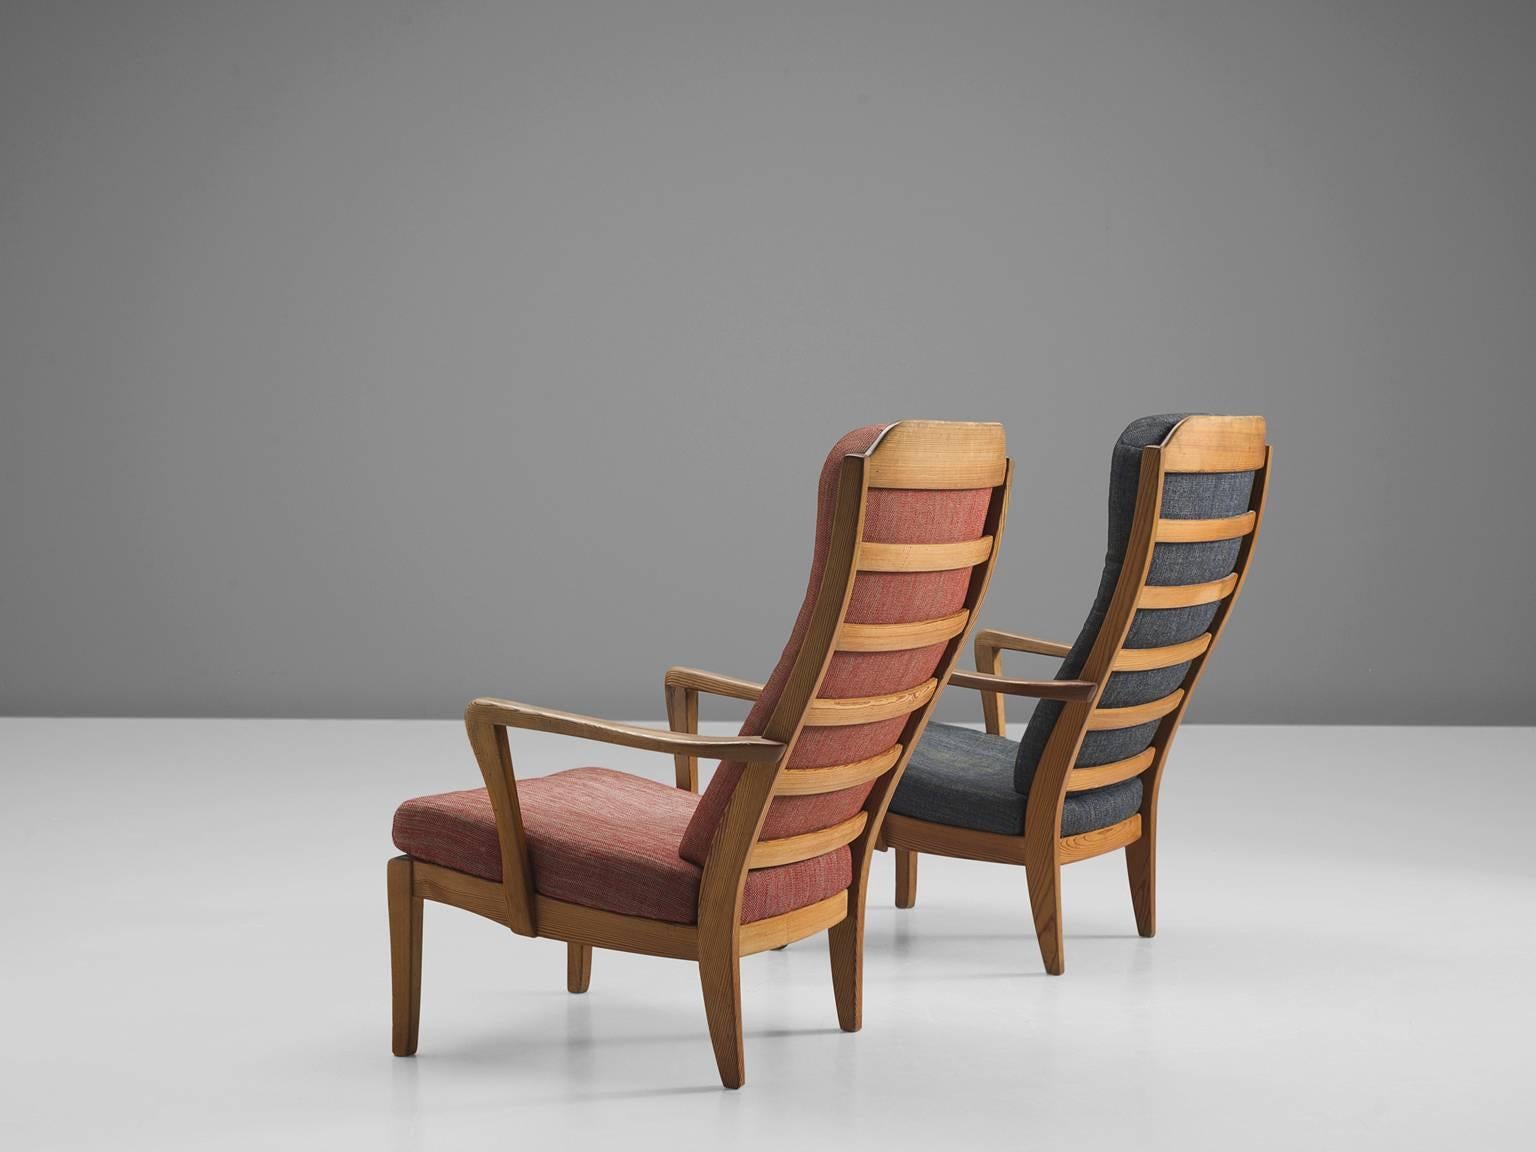 High back easy chairs, pine and original fabric, Sweden, 1943.

The two stately frames of this set of high back chairs bear the archetypical traits of the designs by the Swede Carl Malmsten. The frame, executed in pine, shows the typically